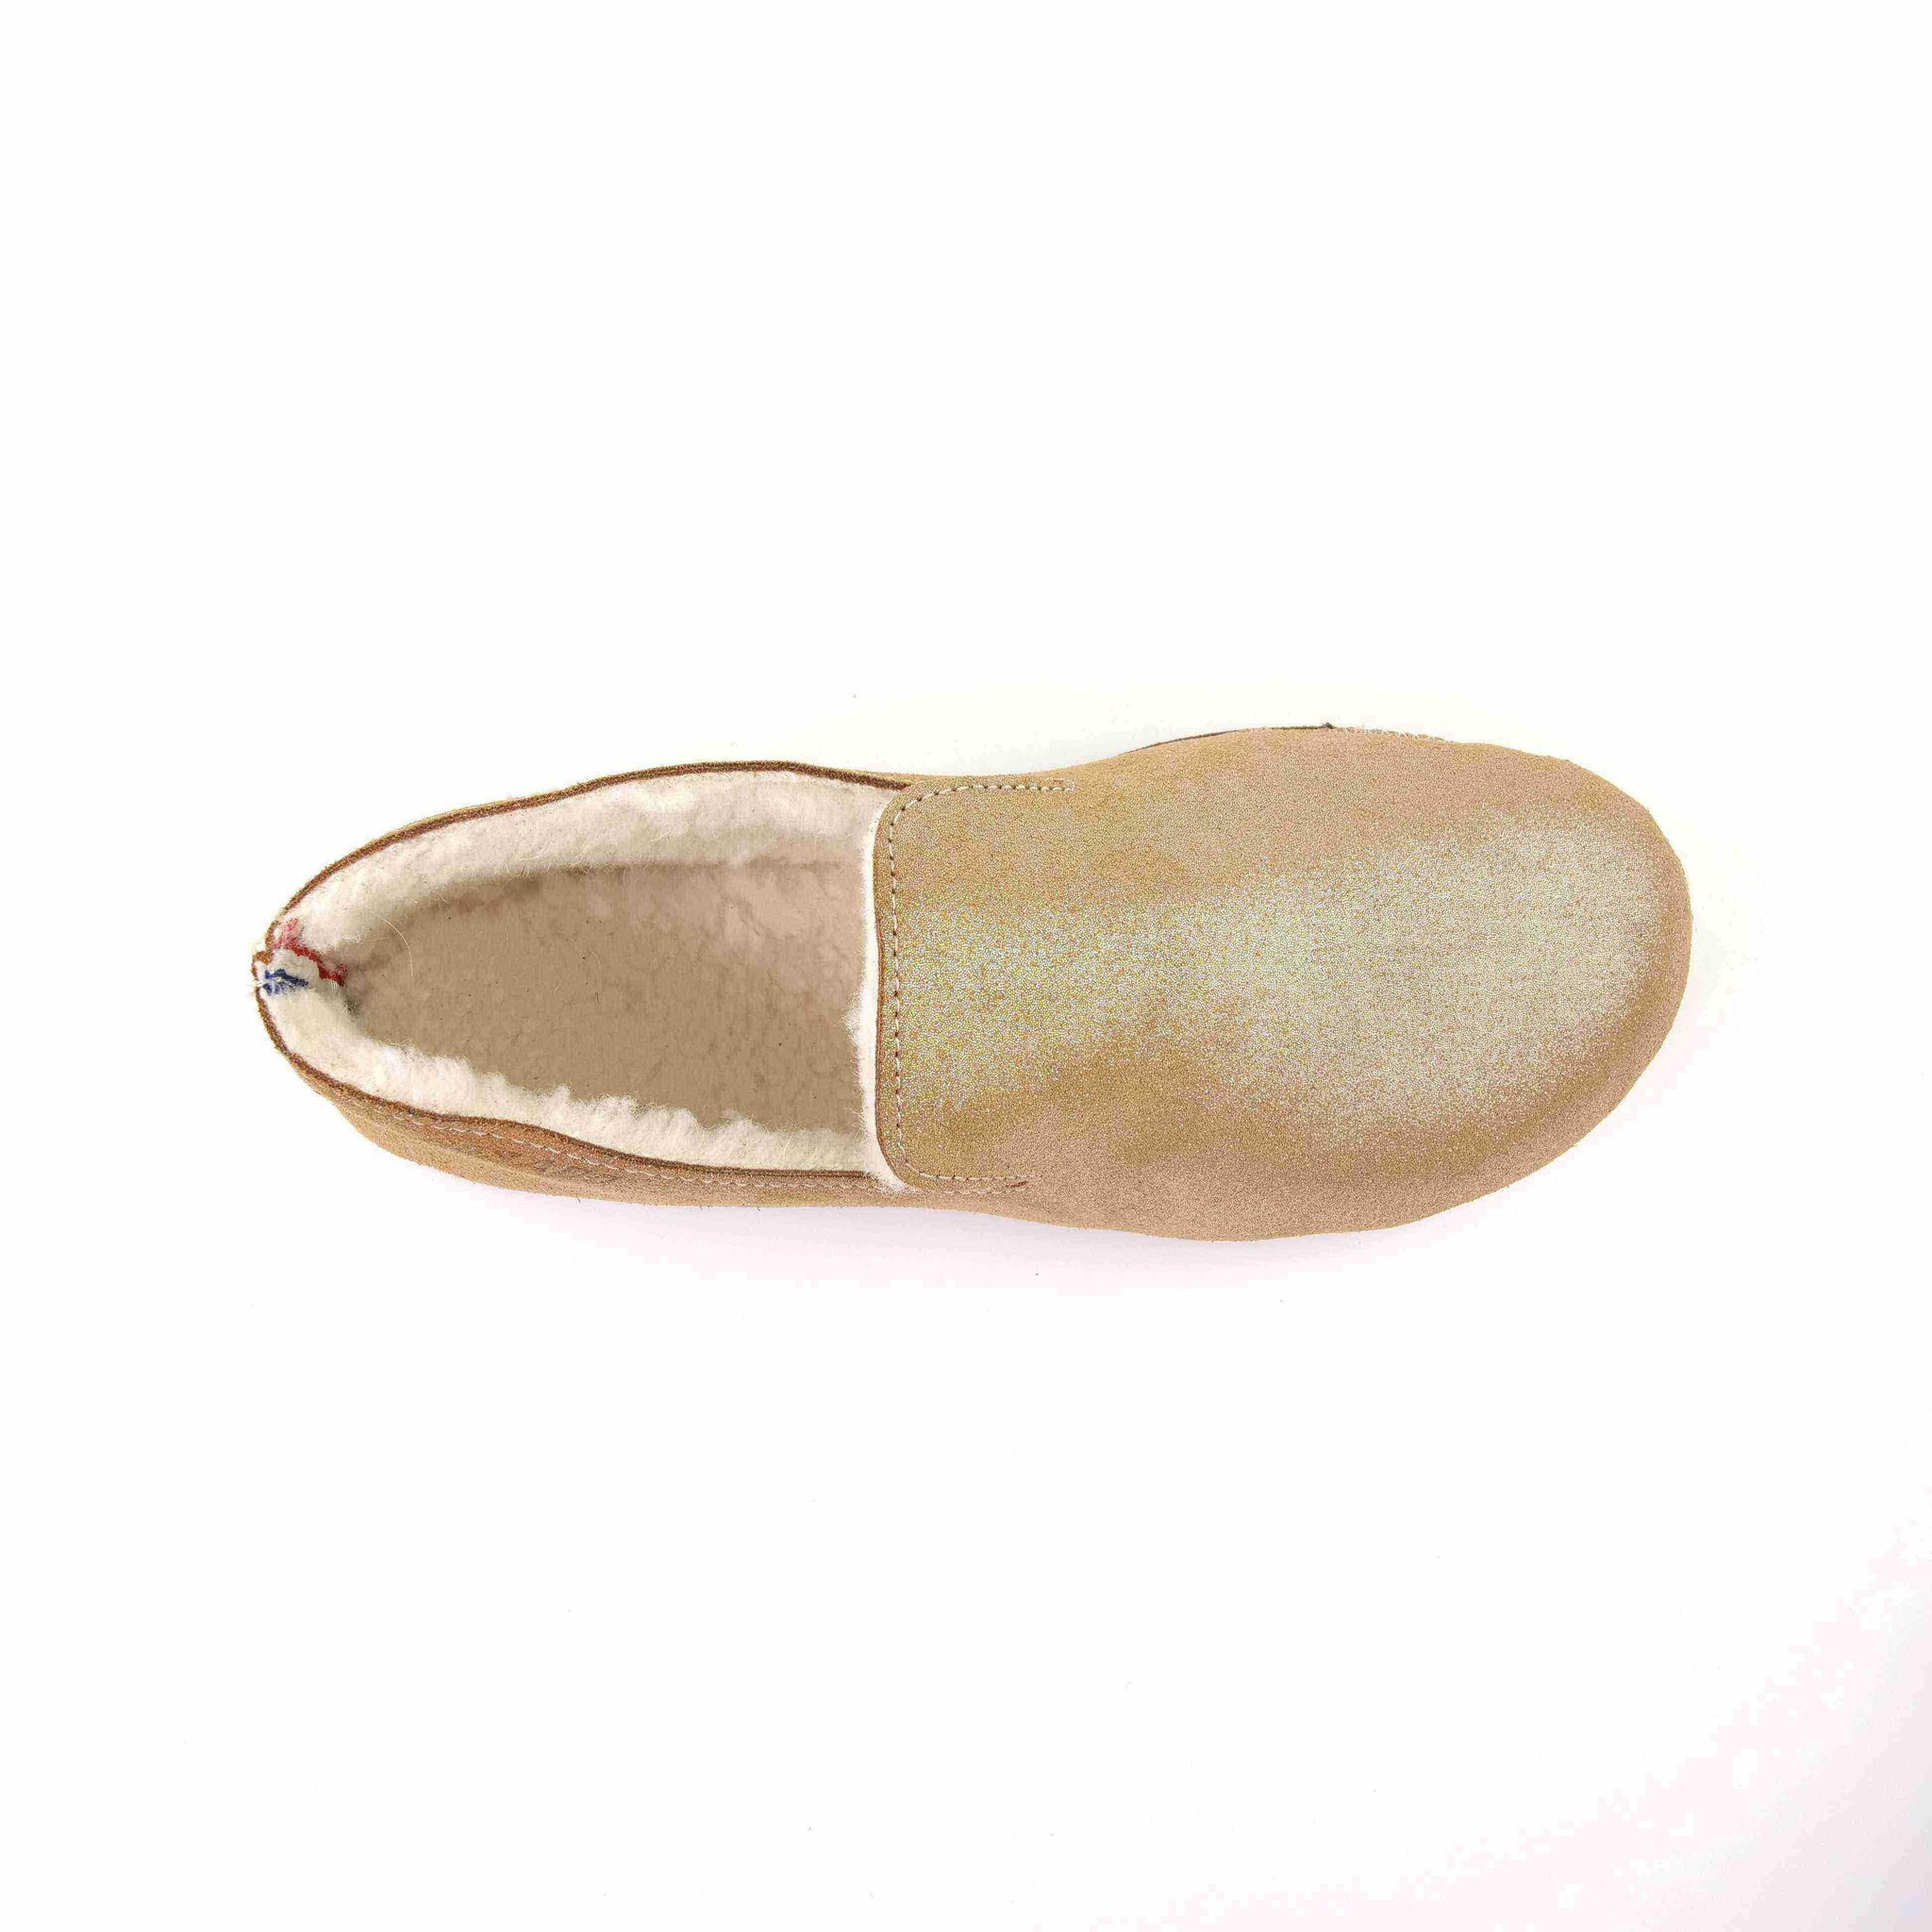 Hug Metallic suede leather slippers Caramel - MADE THE EDIT